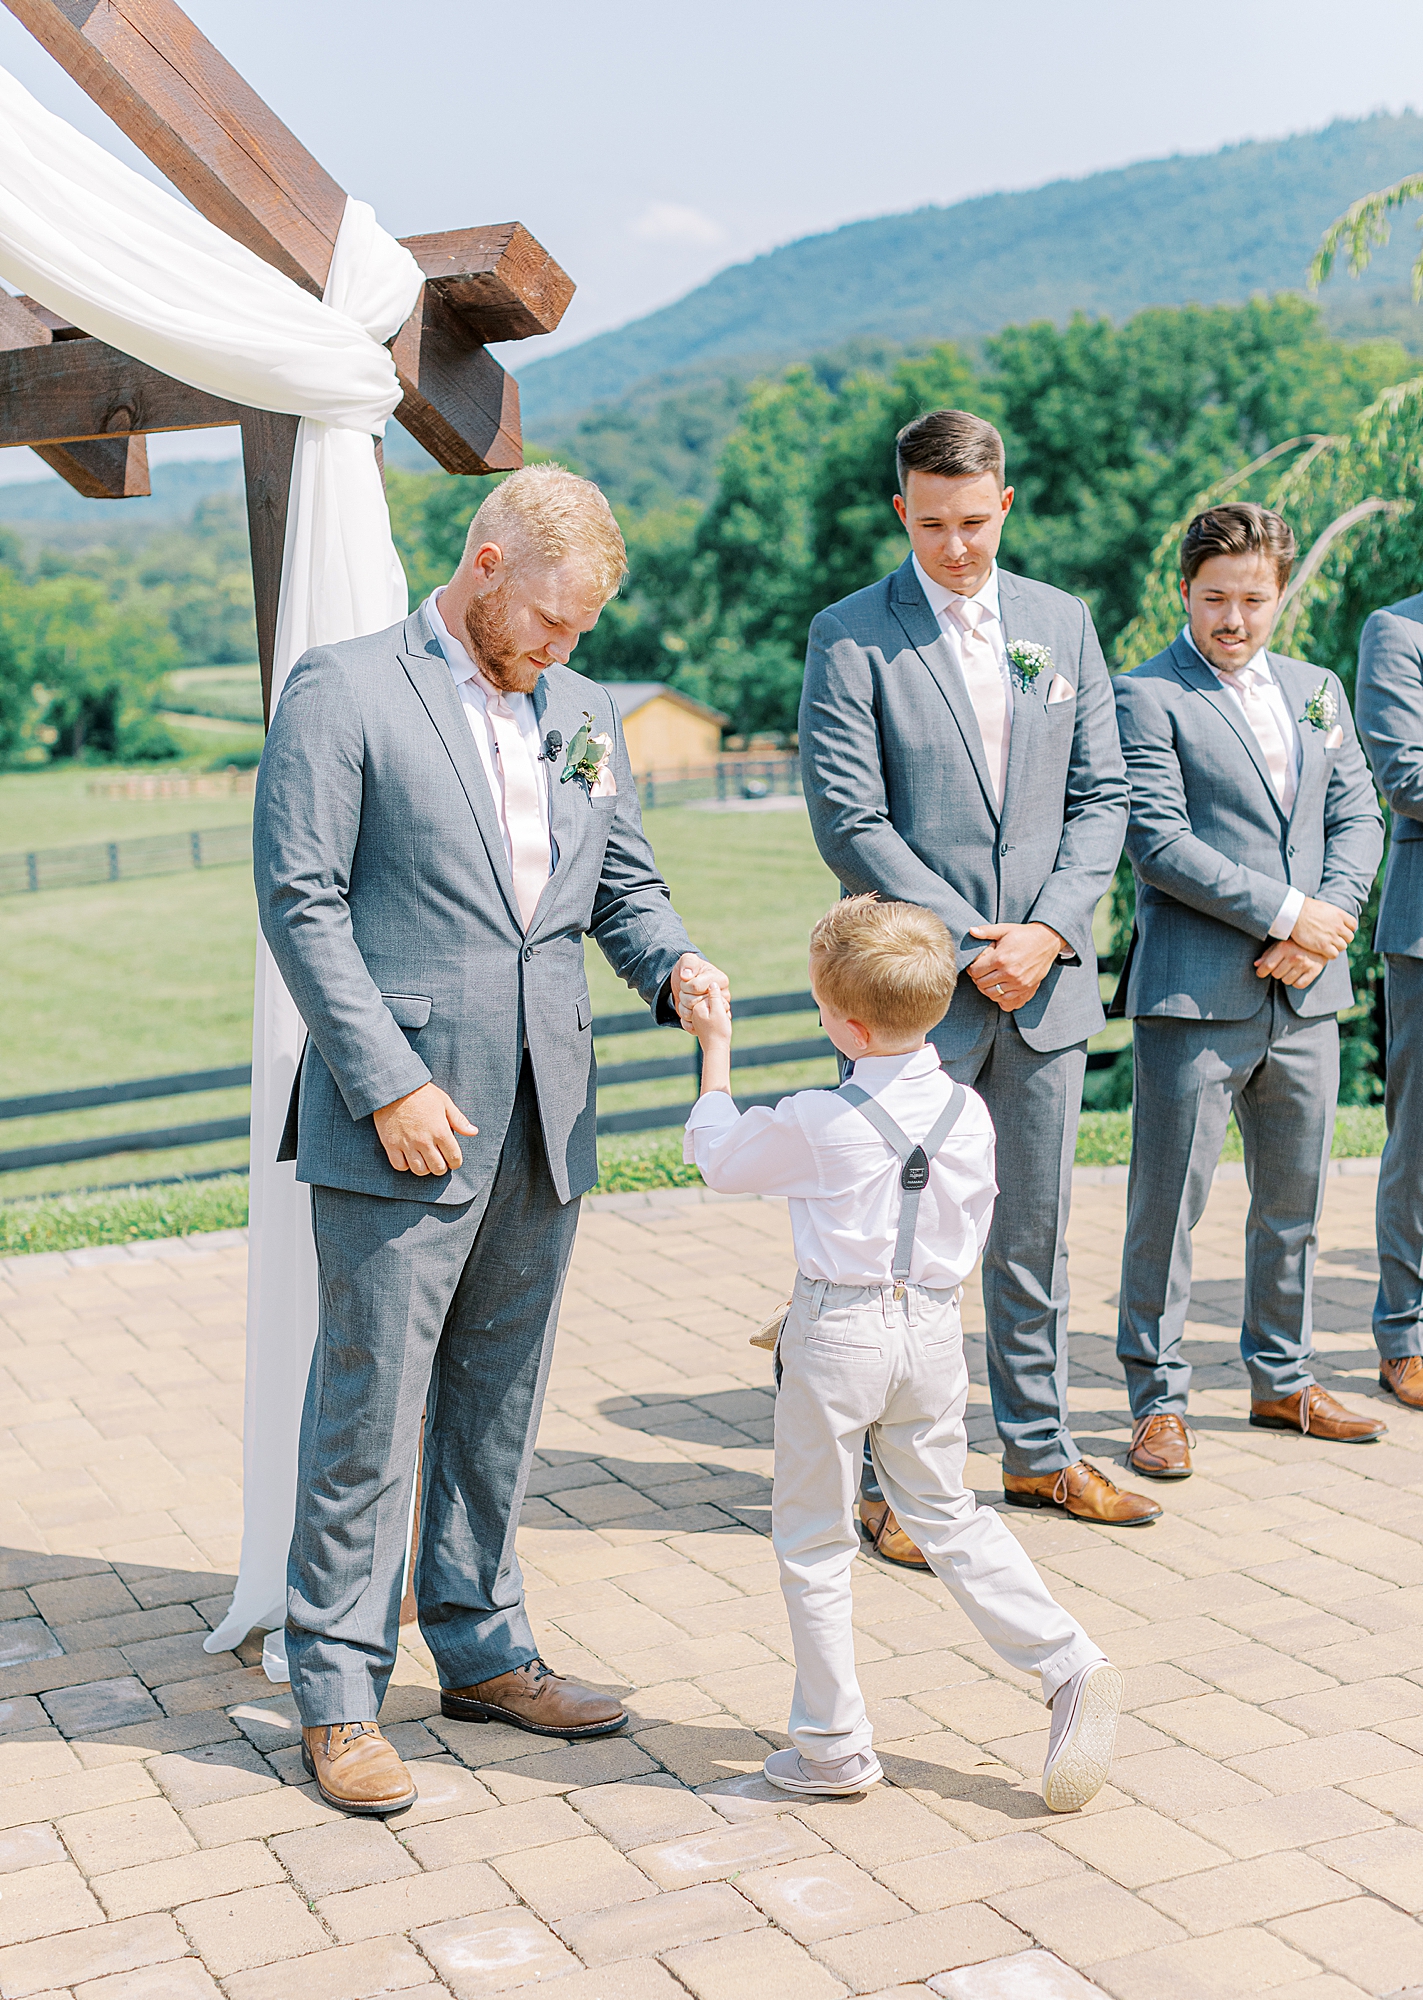 Groom fist bumping ring bearer down the aisle.